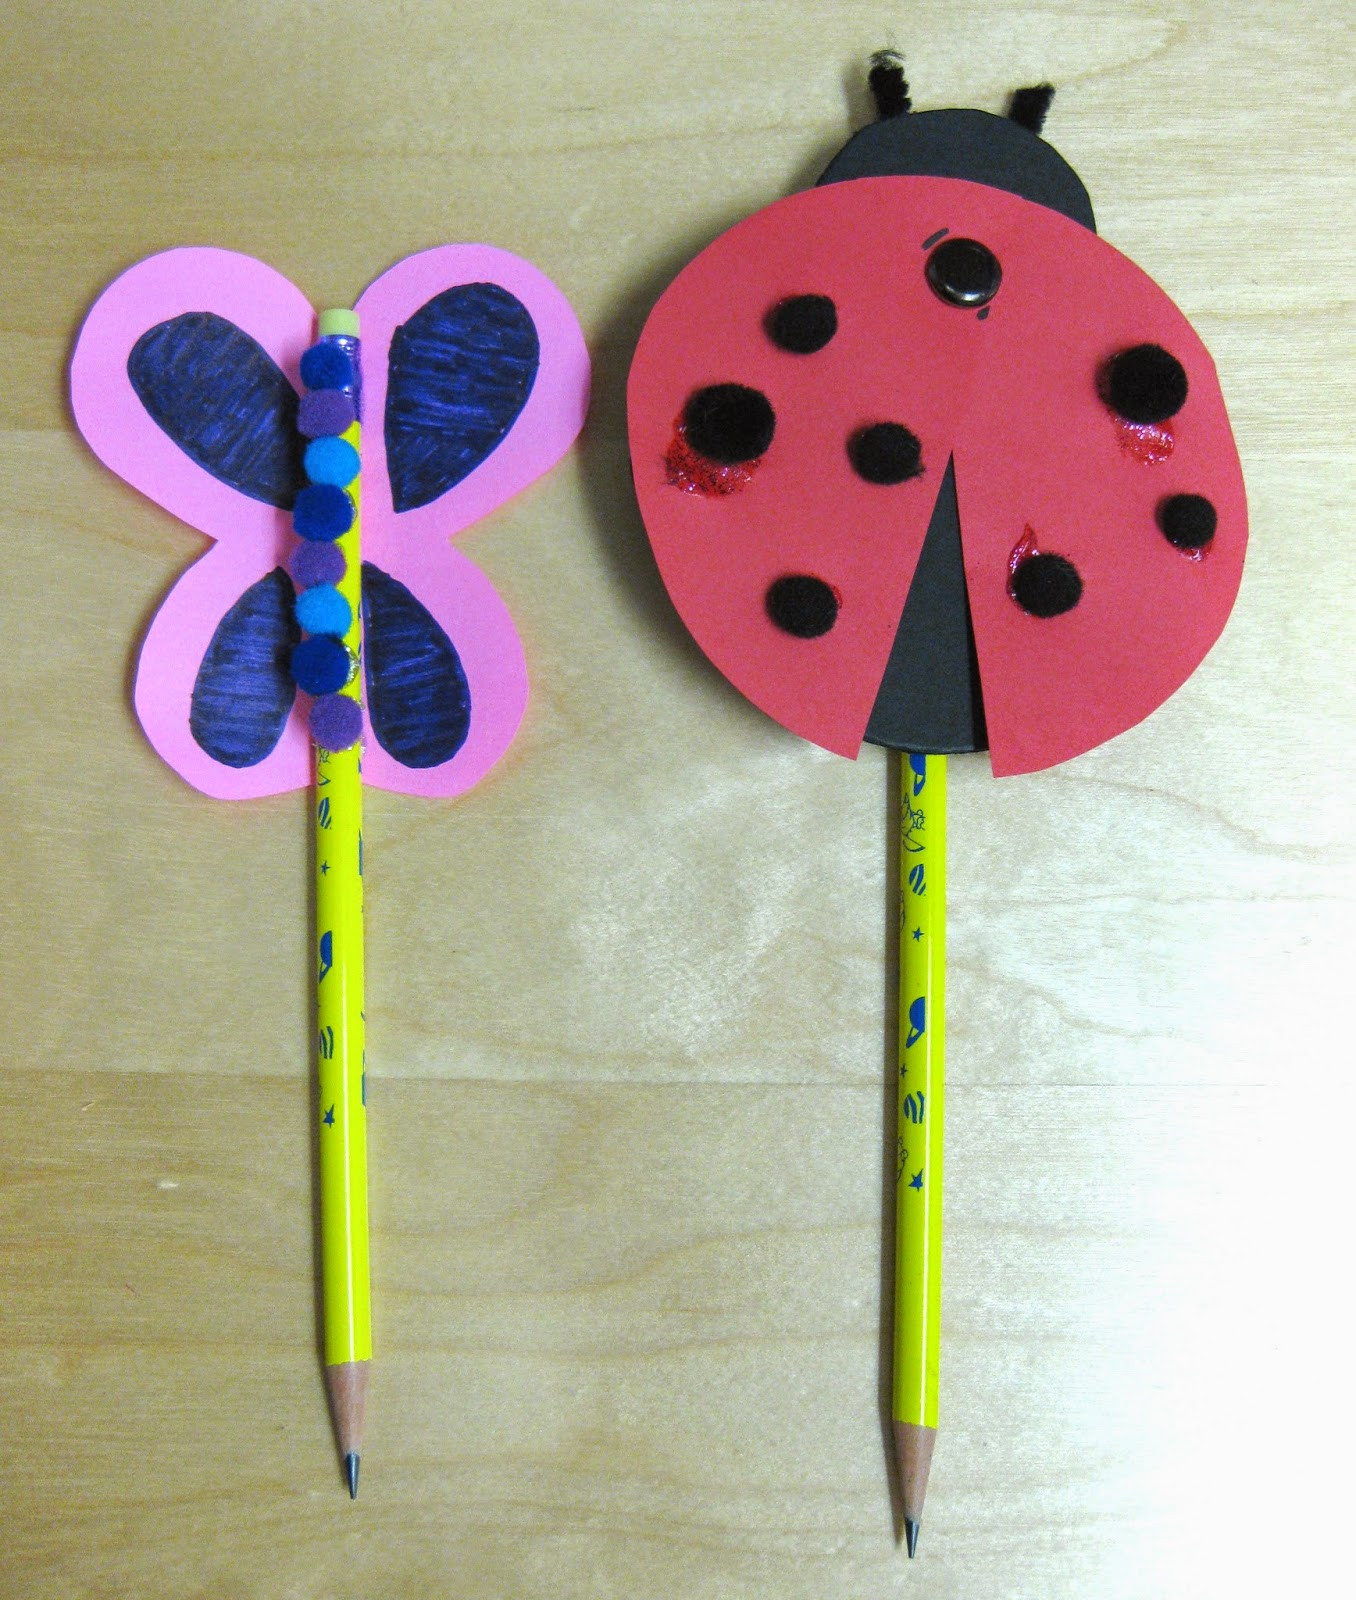 Arts And Crafts For Toddlers
 pencil craft ideas for kids crafts and arts ideas